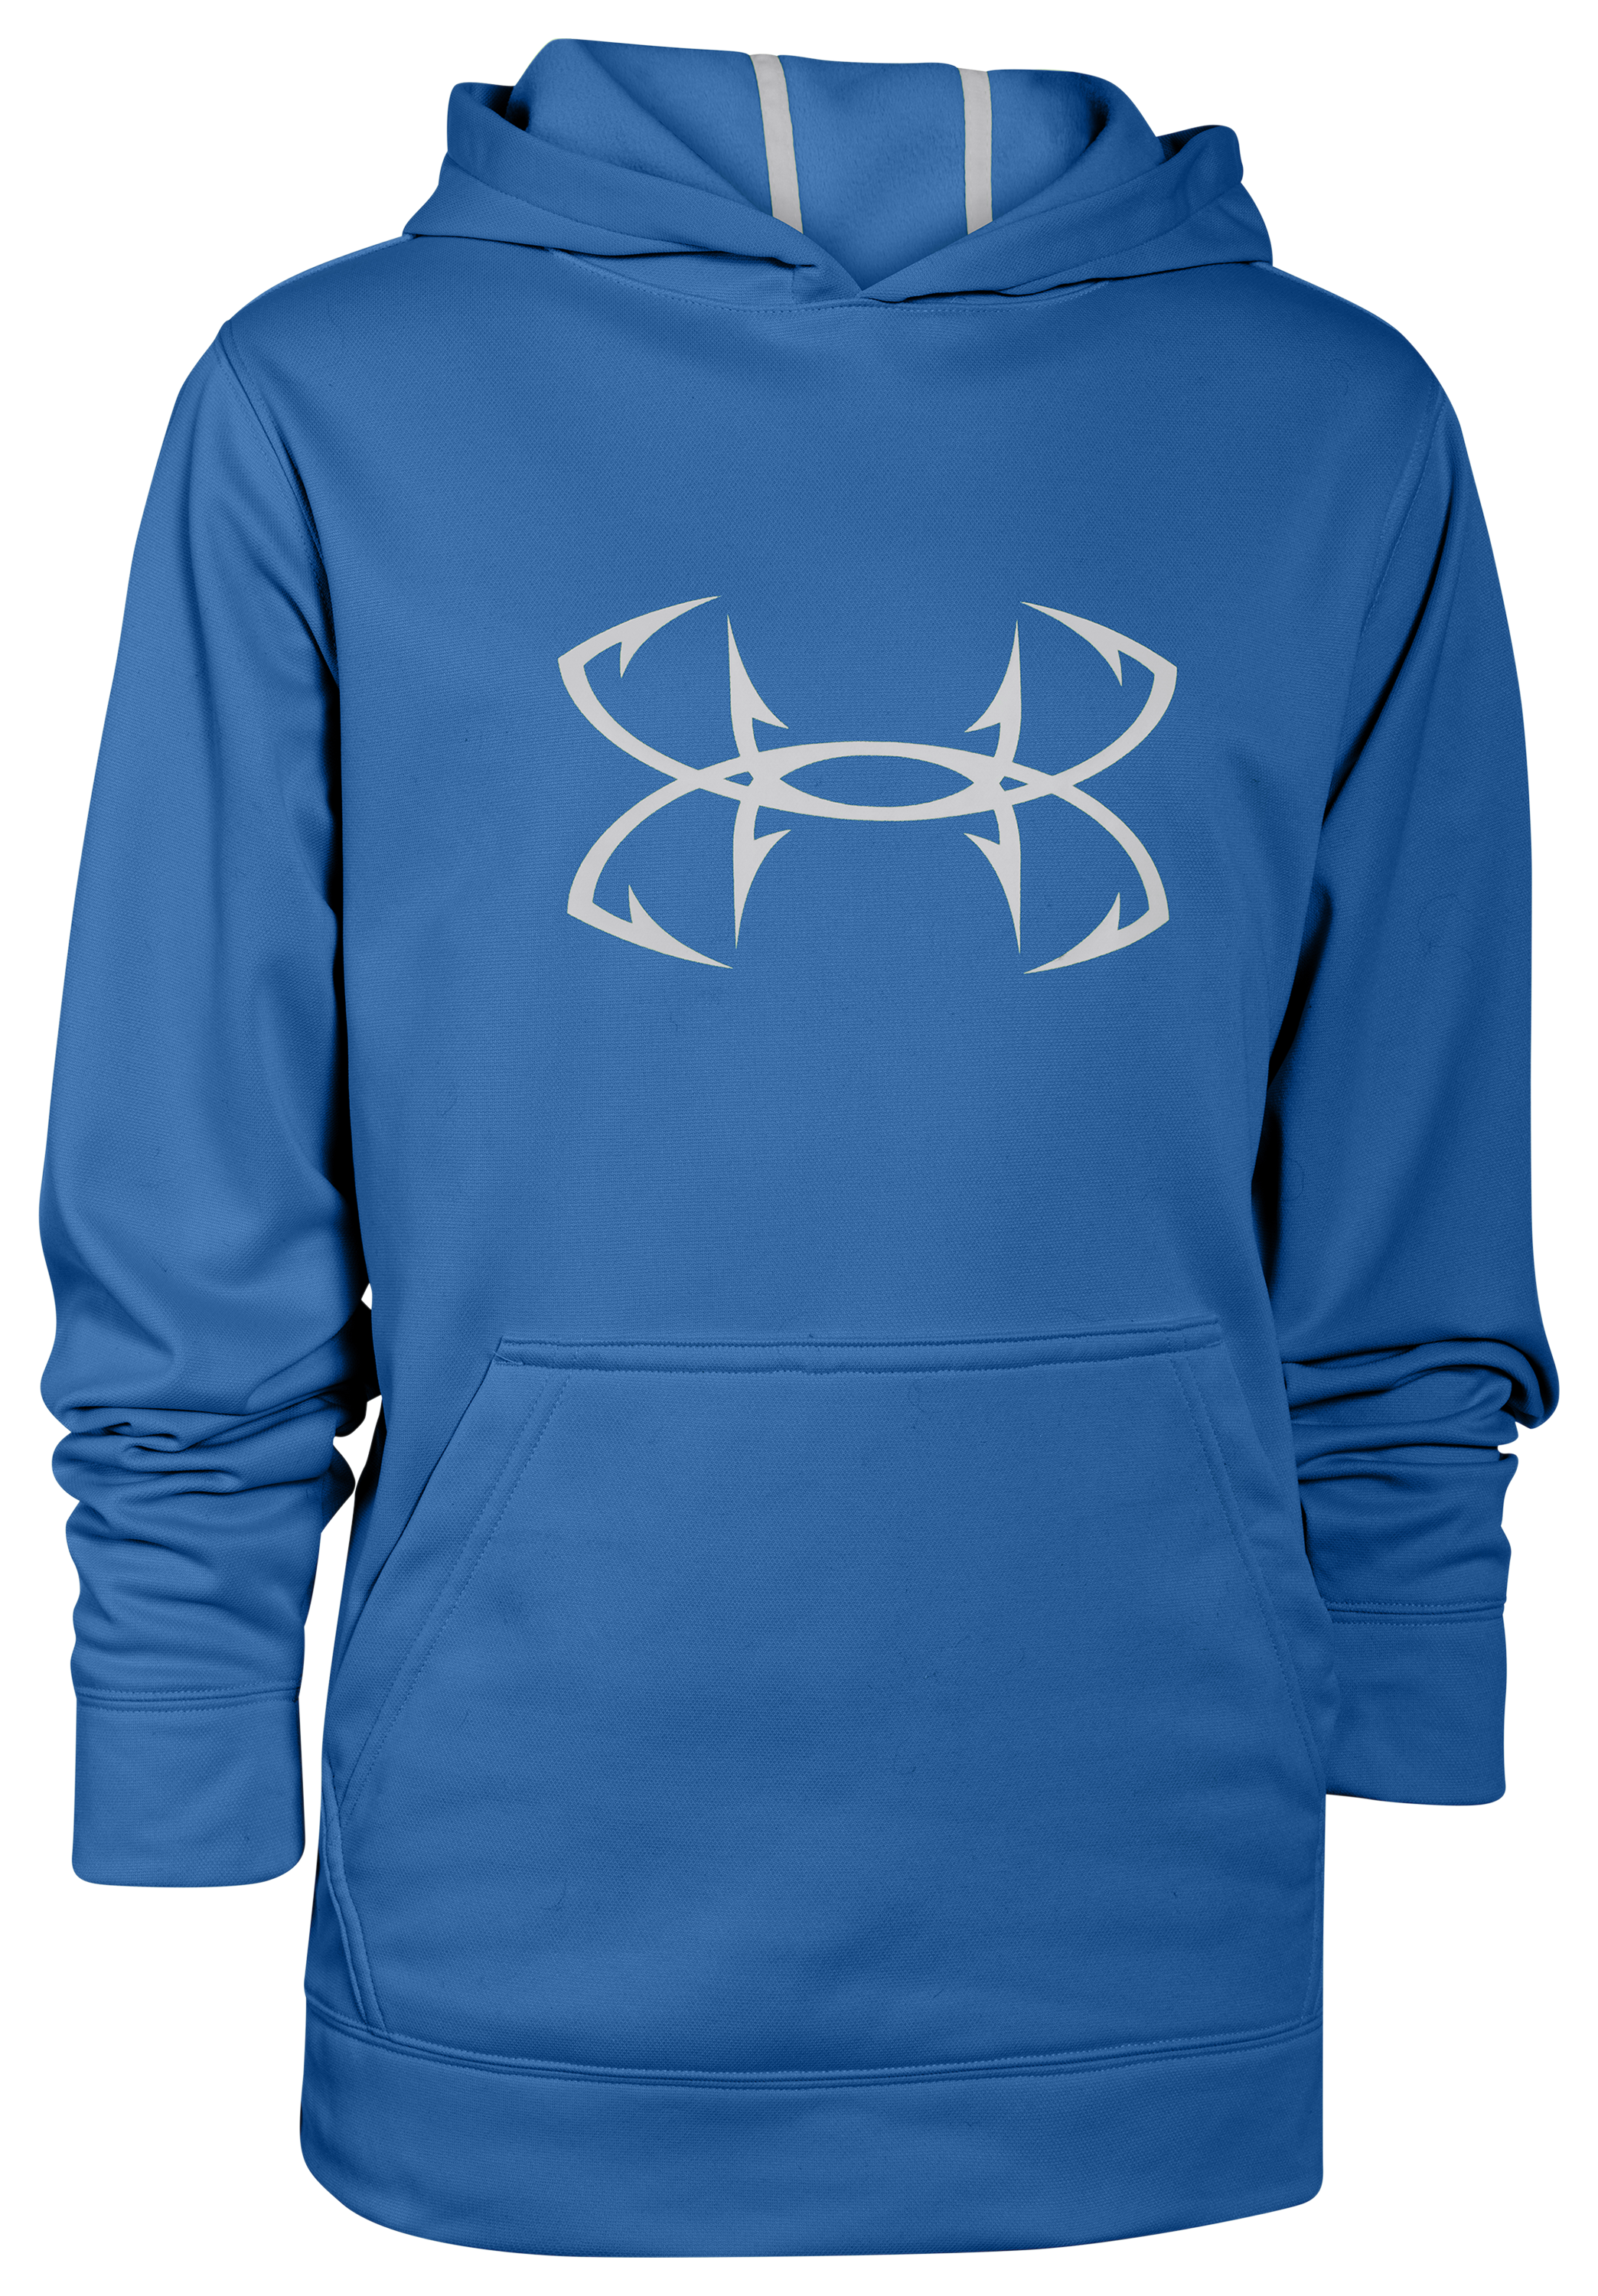 Under Armour Storm Fish Hook Logo Hoodie for Boys